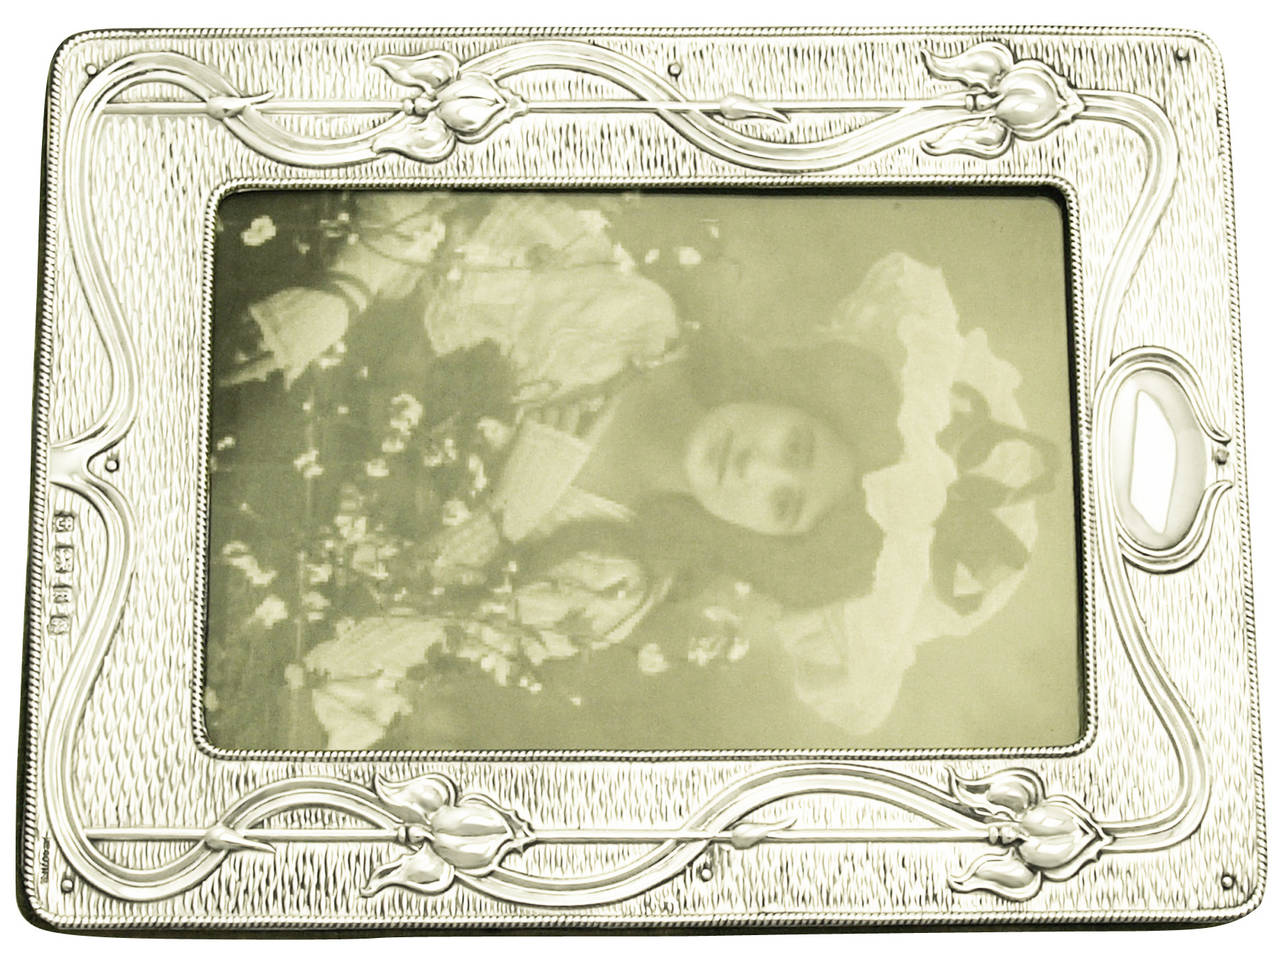 Early 20th Century Antique Edwardian Sterling Silver Photograph Frame, Art Nouveau Style